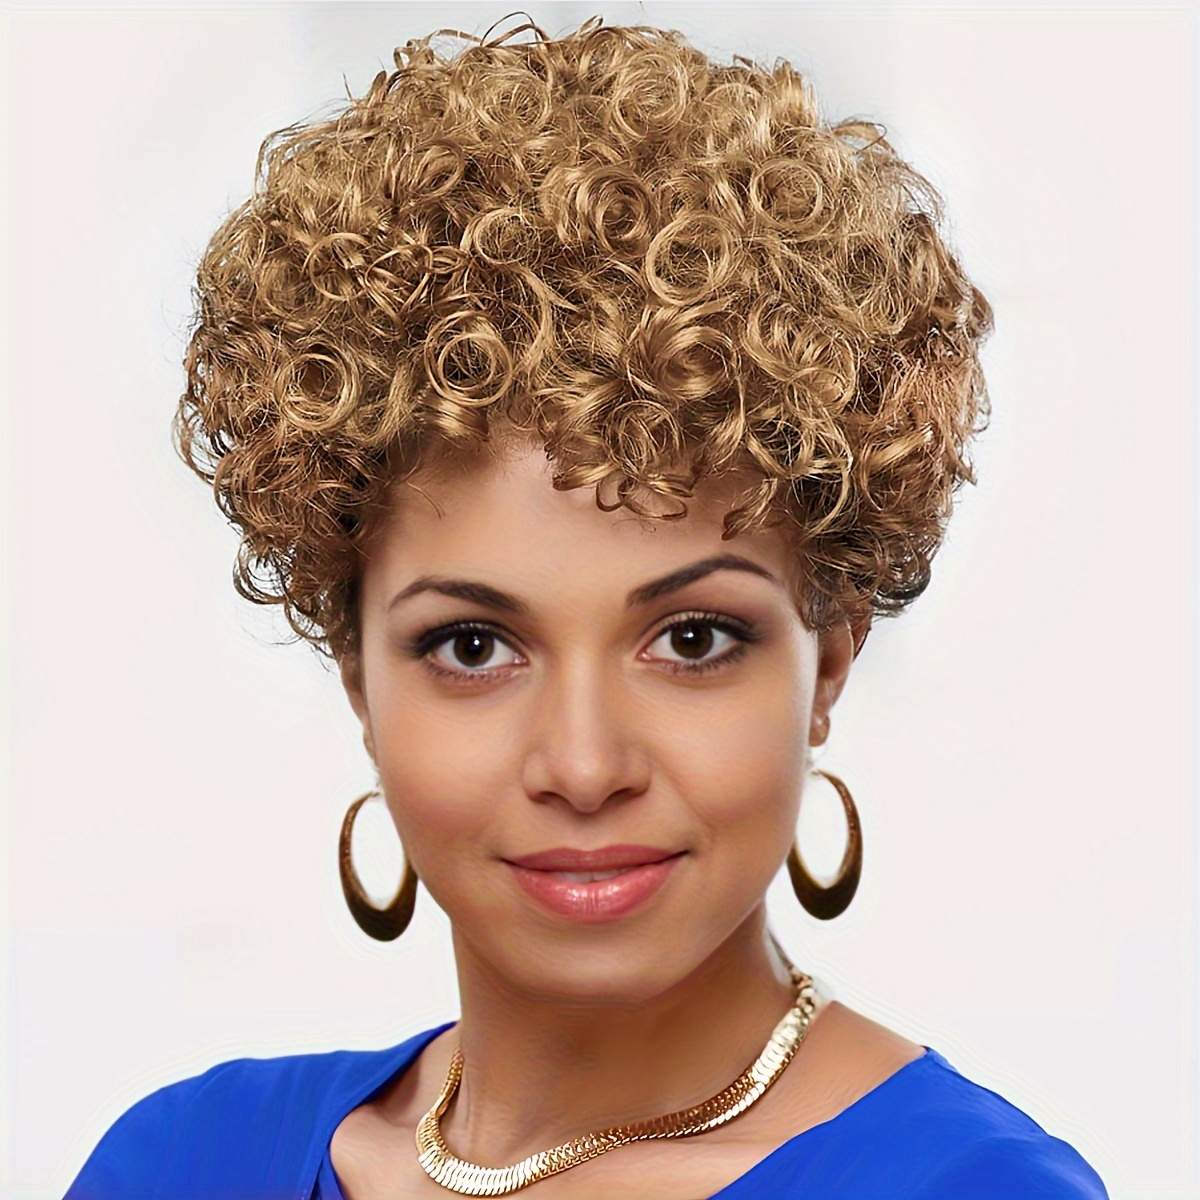 

Women's Short Curly Wig, Honey Blonde, Volume-rich Spiral , Fashionable & Elegant, Synthetic Hair With Natural Look, Adjustable Cap For Comfort Fit